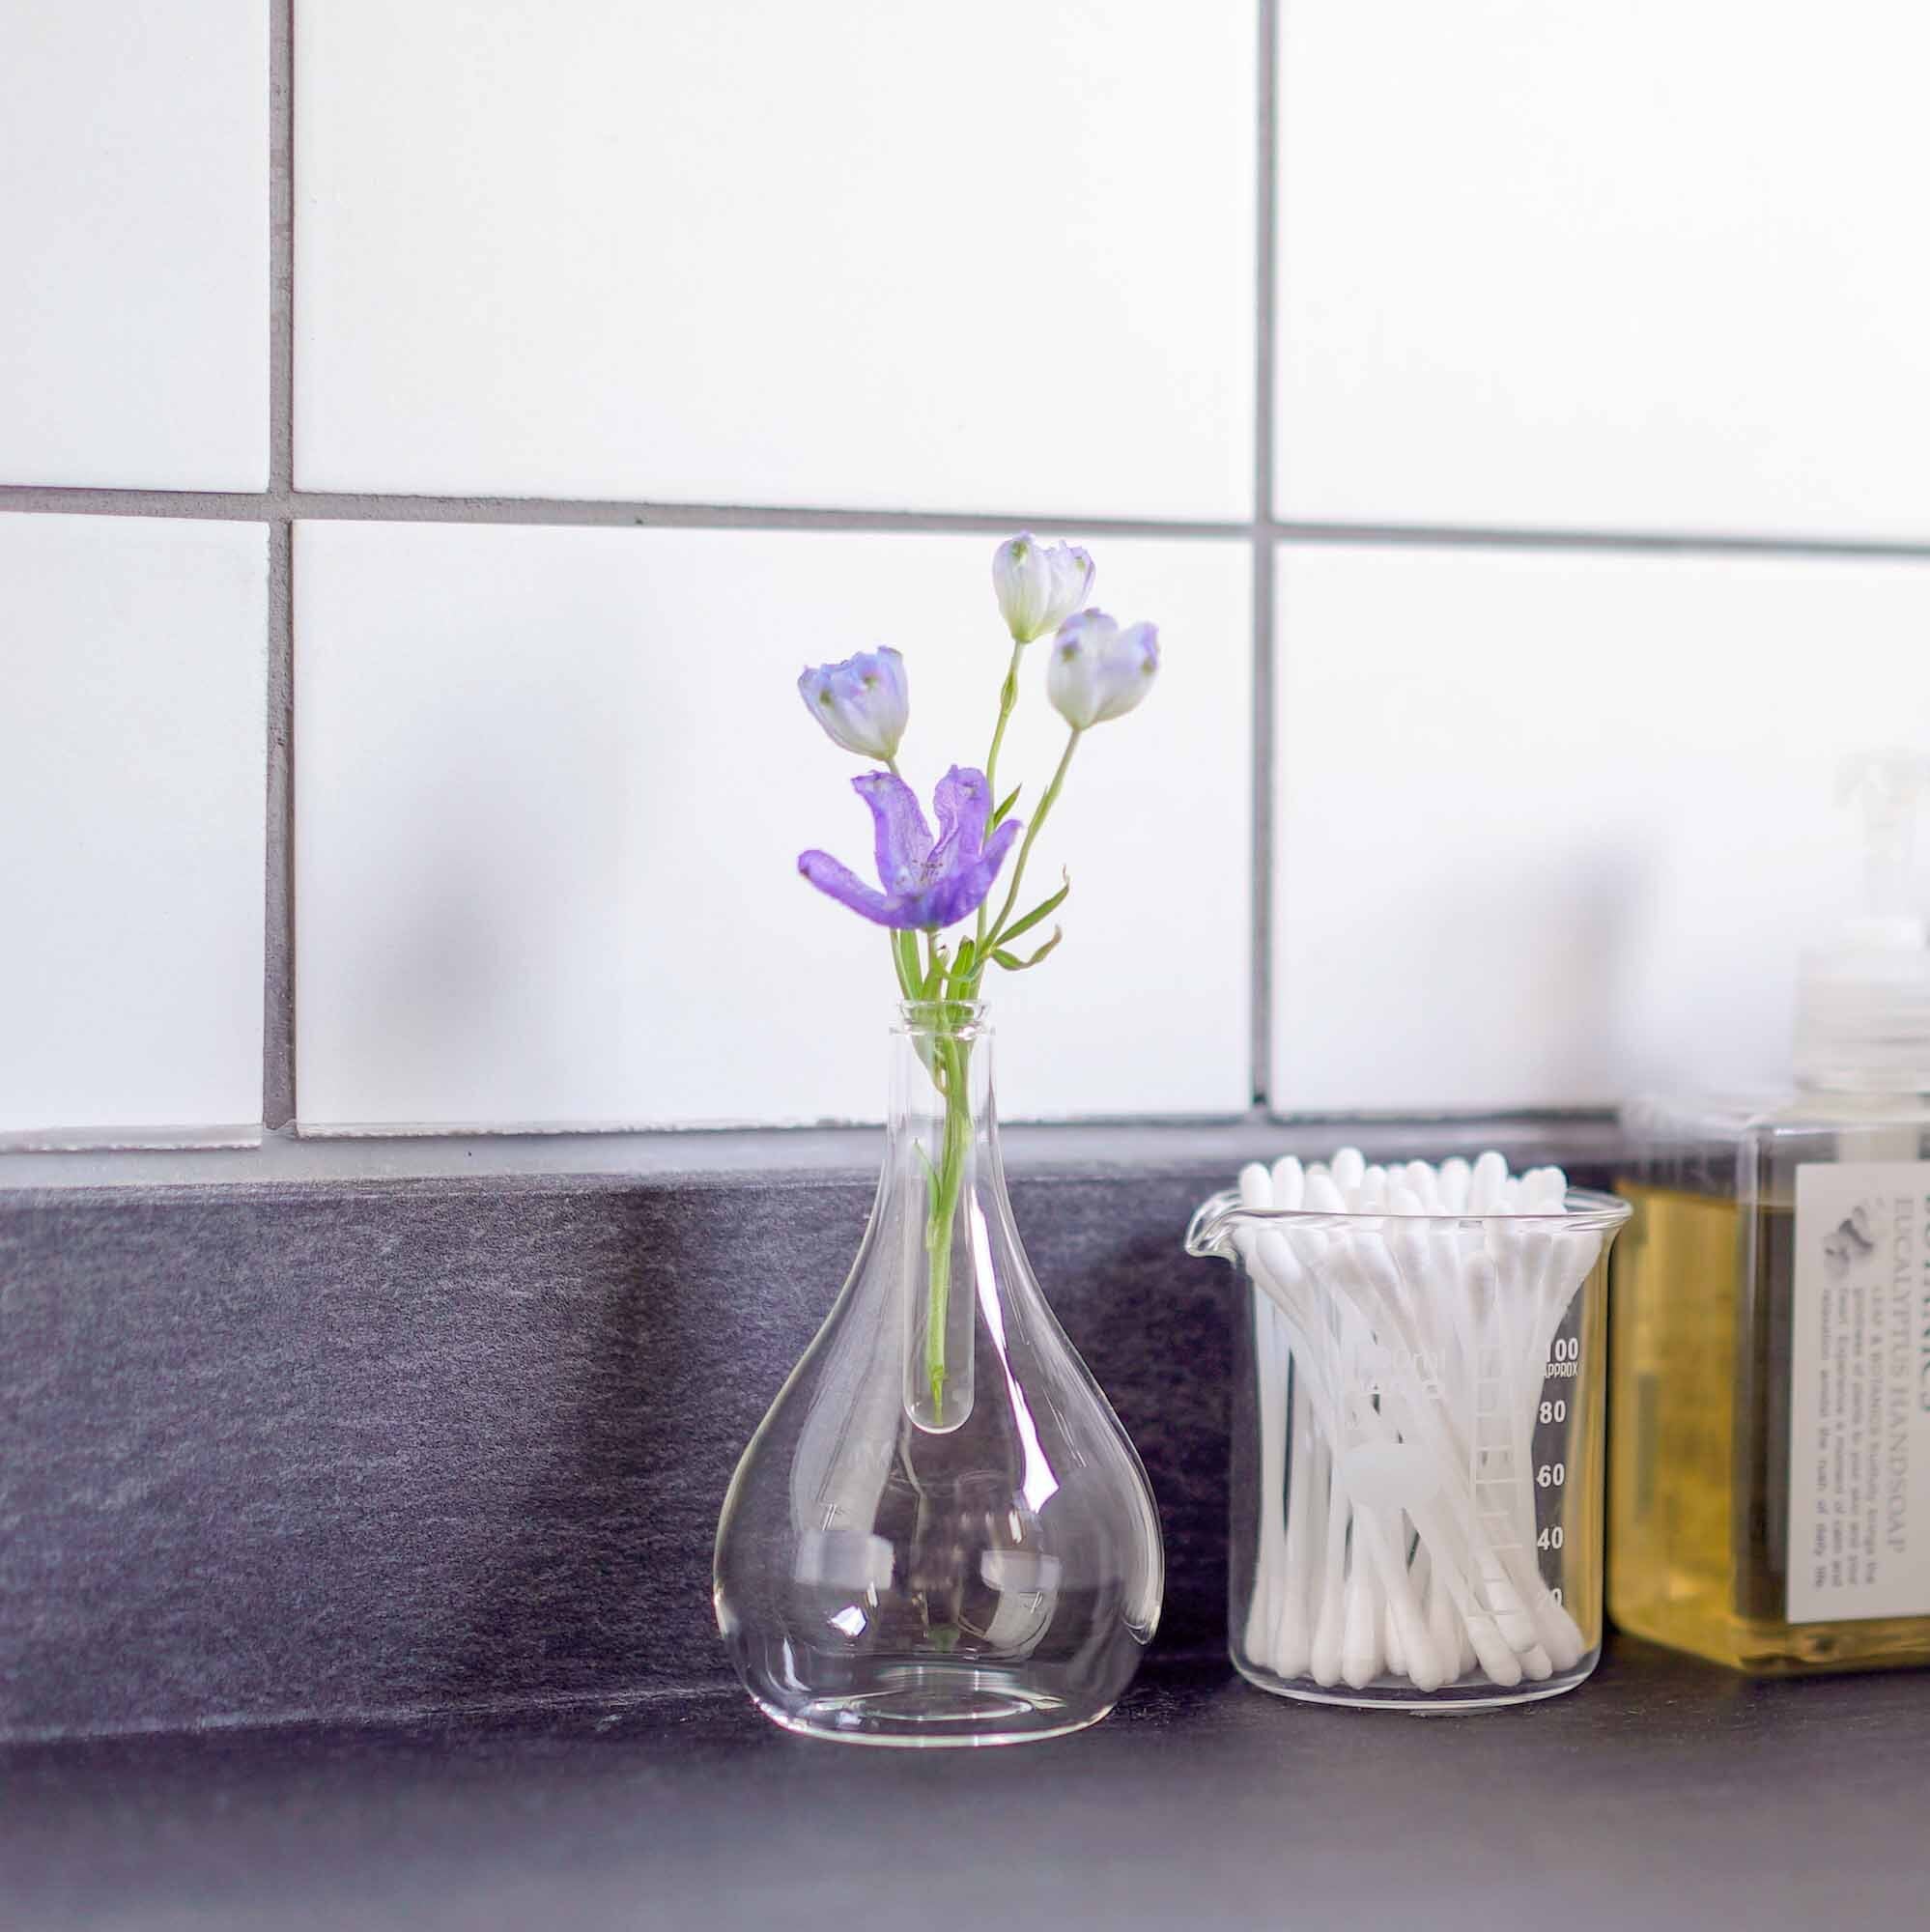 Tear drop shaped glass diffuser with purple and white flowers seated on a grey bathroom countertop with white tile behind and beside a glass beaker with cotton swabs and yellow hand soap.